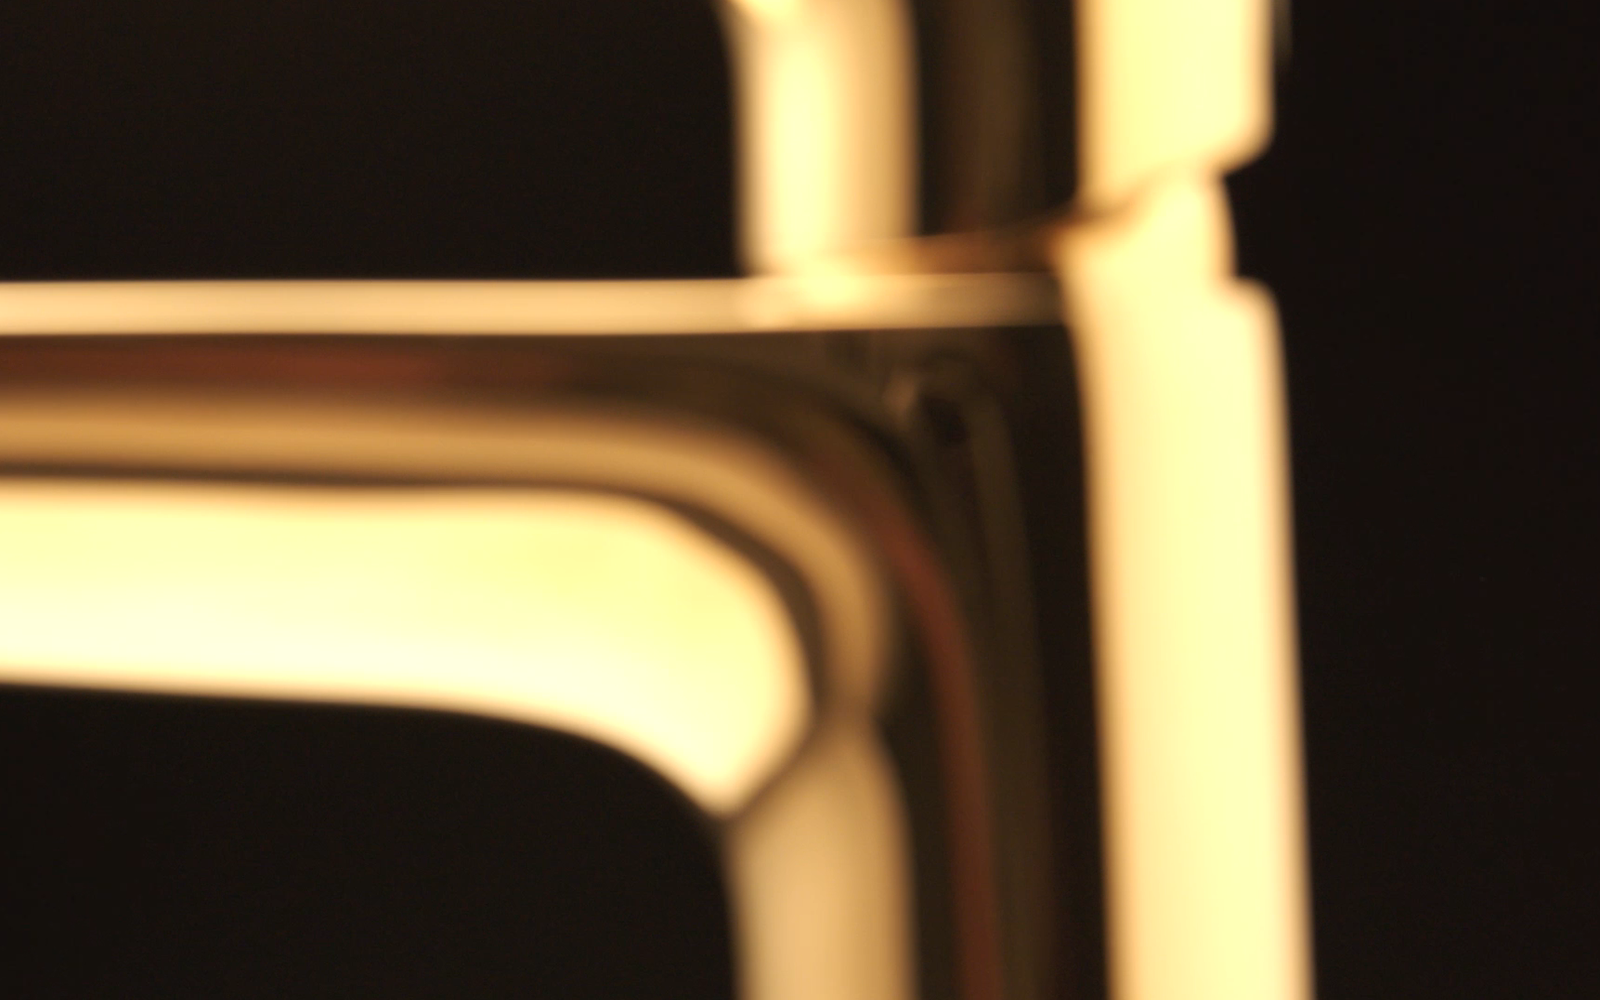 Extreme close up of Hansgrohe tap in gold